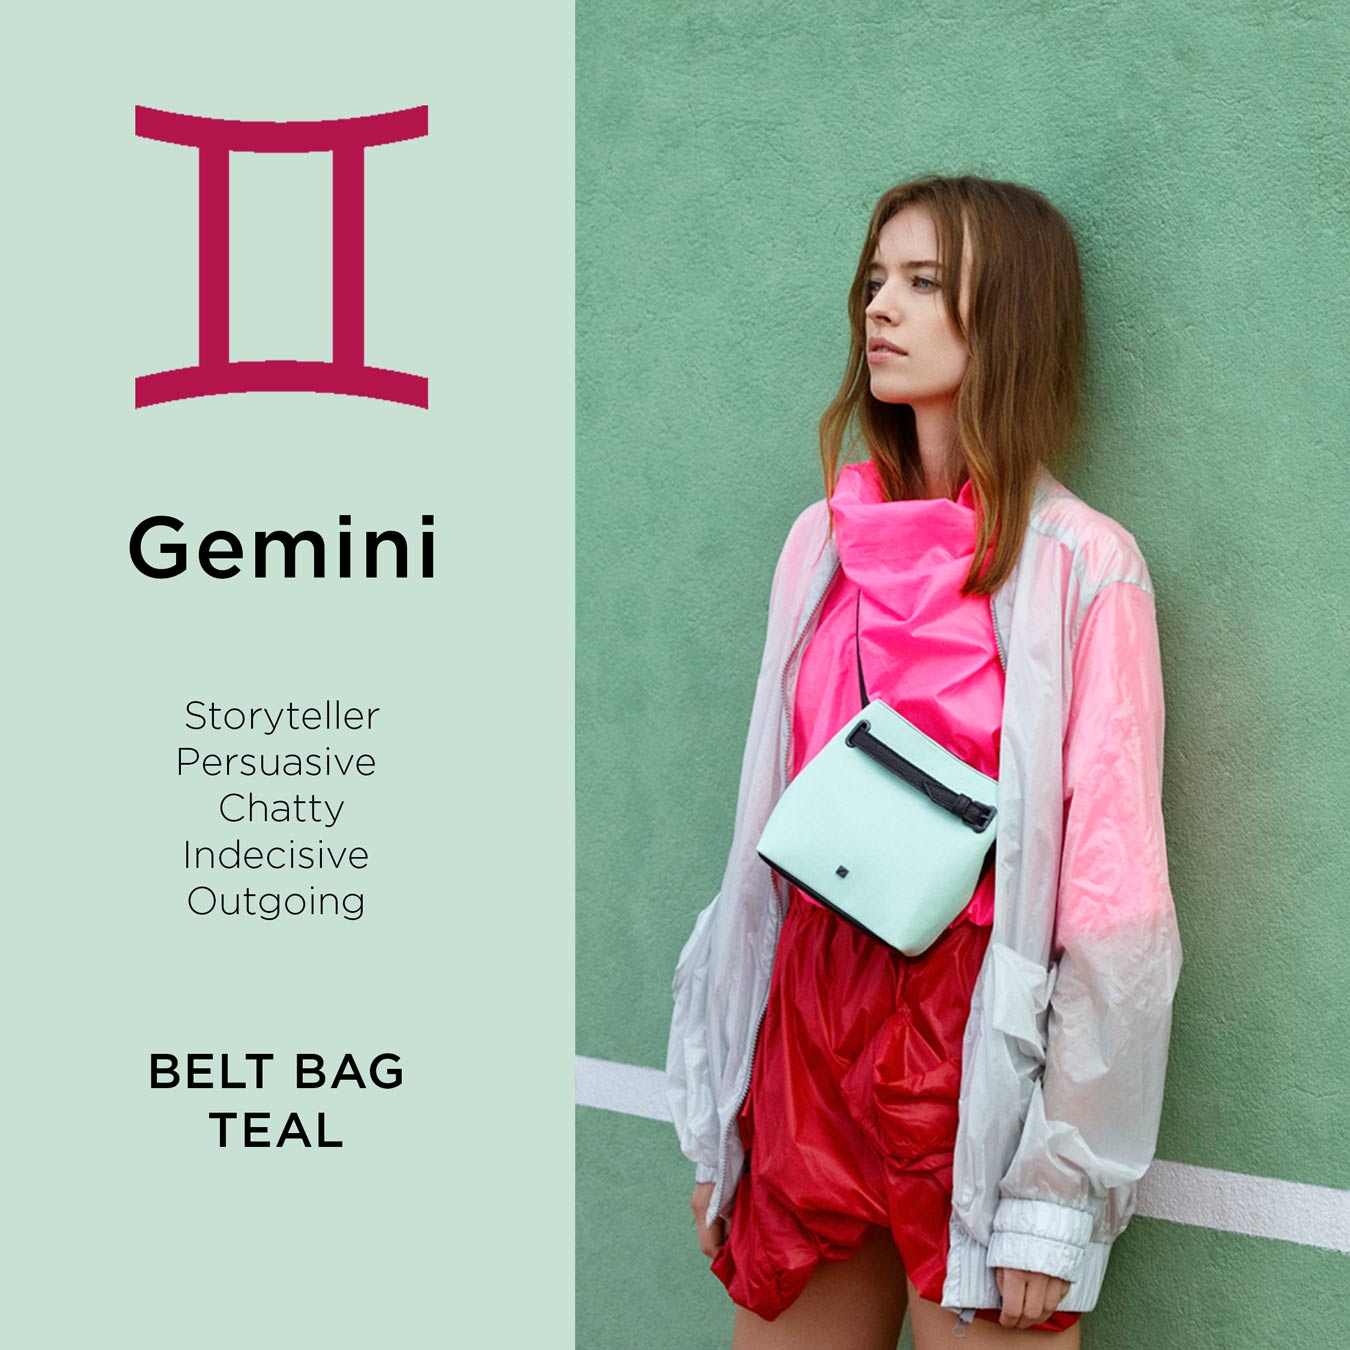 The perfect bag for the Gemini Woman!